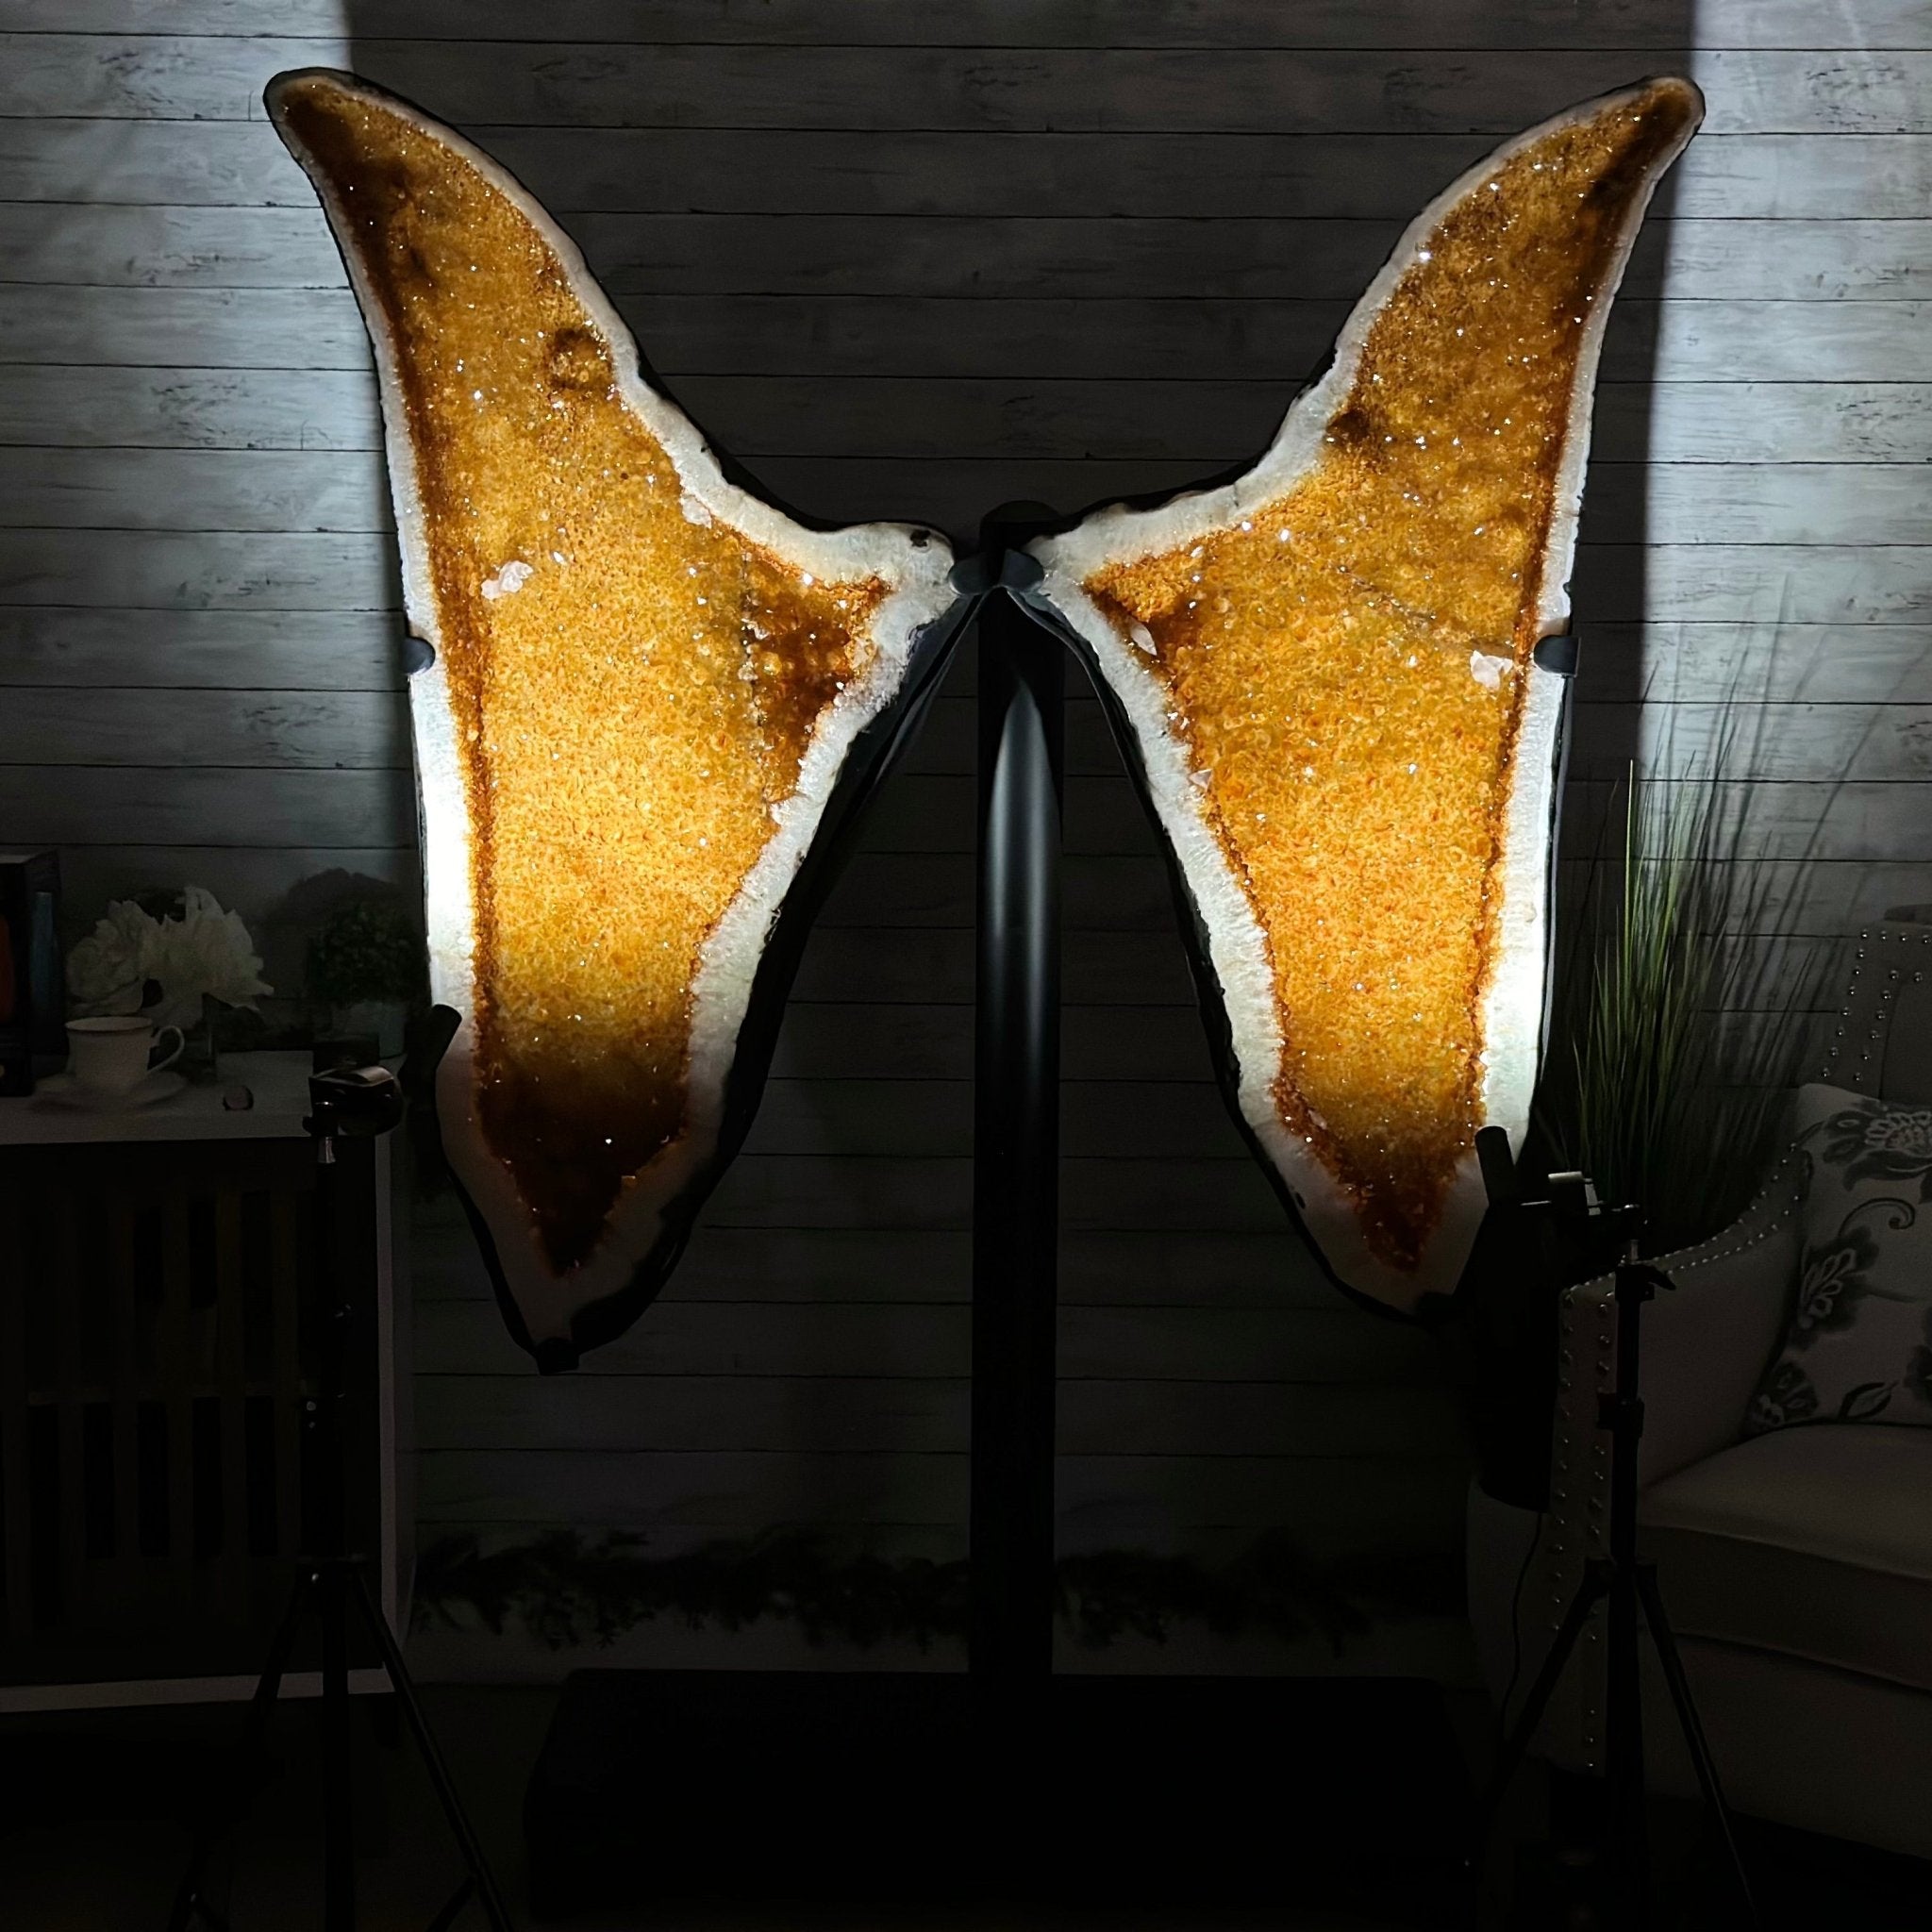 Large Citrine Butterfly Wings on a Metal Stand, 472 lbs & 71.6" Tall #5498-0006 - Brazil GemsBrazil GemsLarge Citrine Butterfly Wings on a Metal Stand, 472 lbs & 71.6" Tall #5498-0006Citrine Butterfly Wings5498-0006